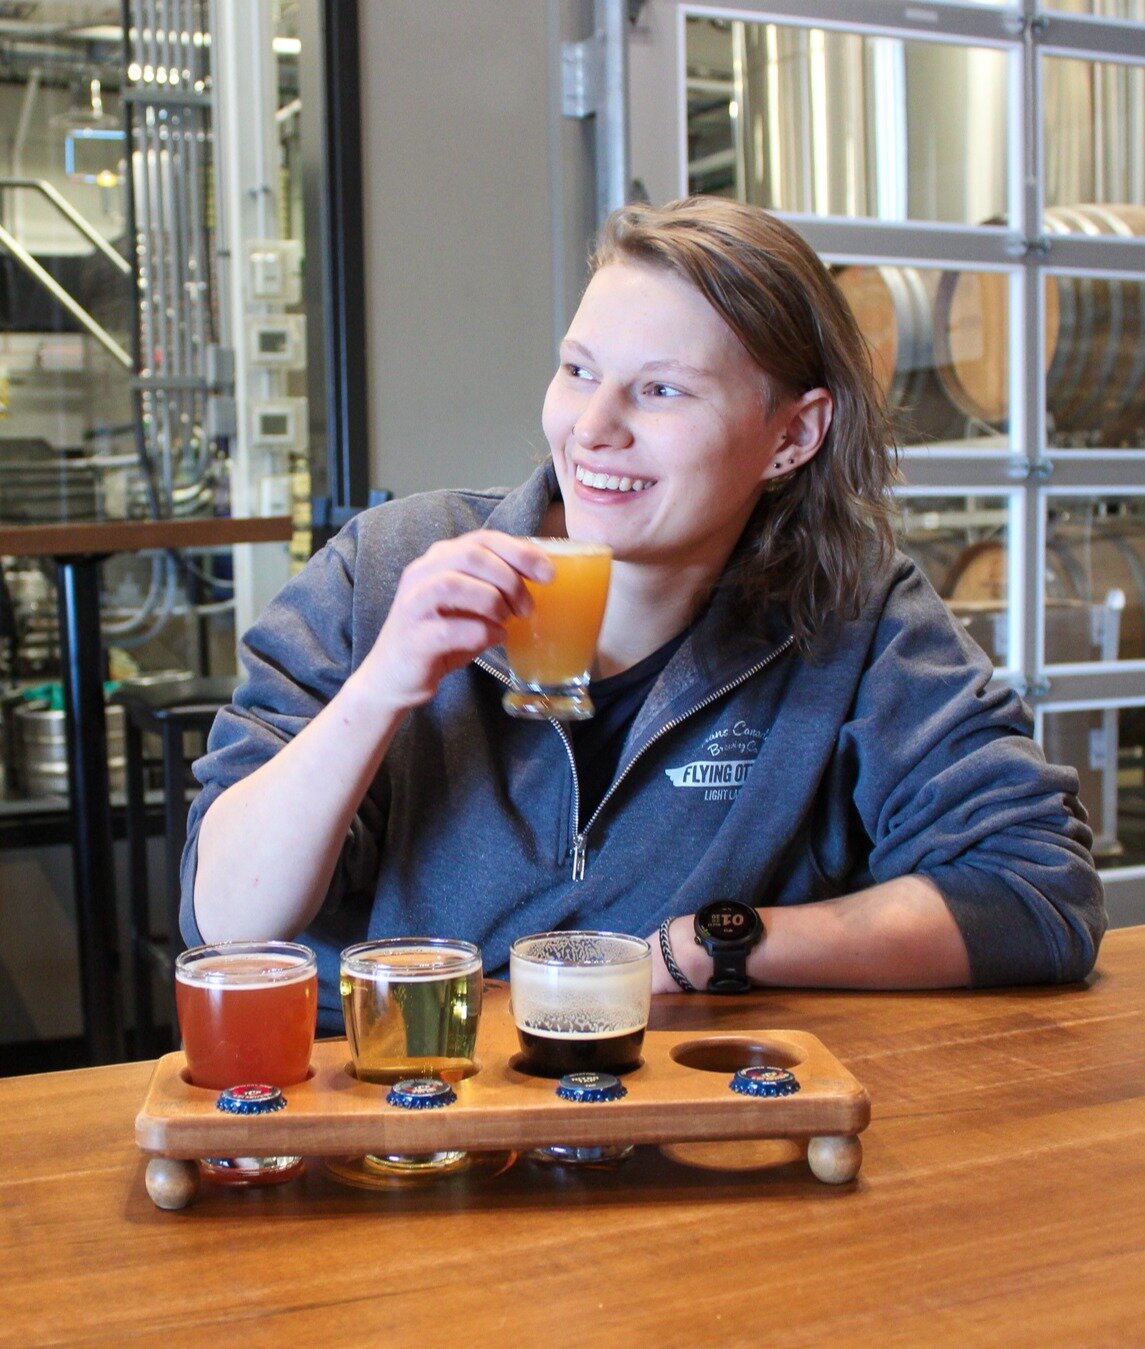 What better way to enjoy a long weekend than with a beer flight!

Our taproom and General Store are open tomorrow from 11 a.m. to 11 p.m. Swing by to try some of our new limited edition and seasonal pours!